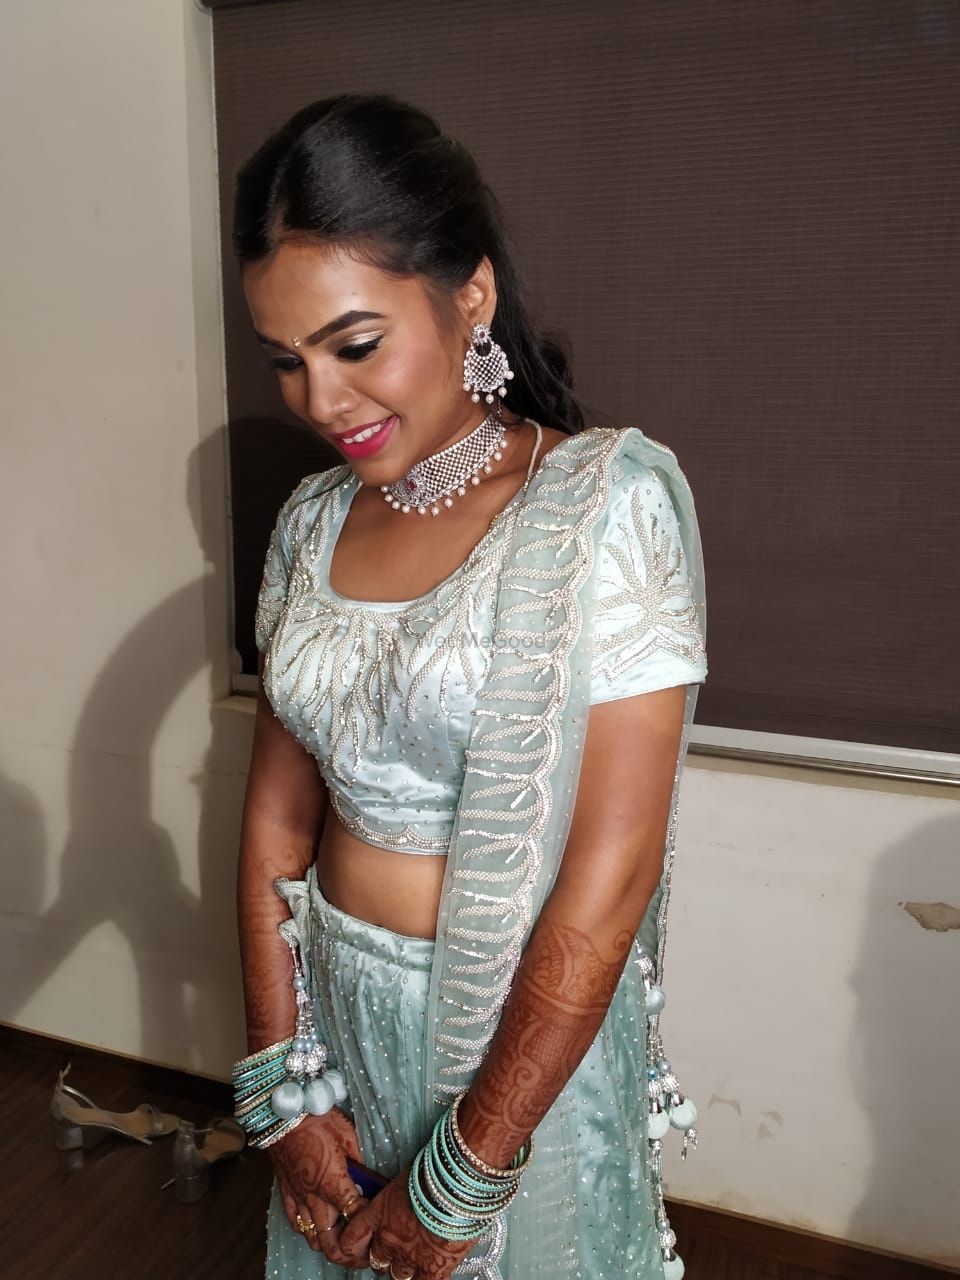 Photo From Reception Makeup - By Makeup by Suhasini Shinde